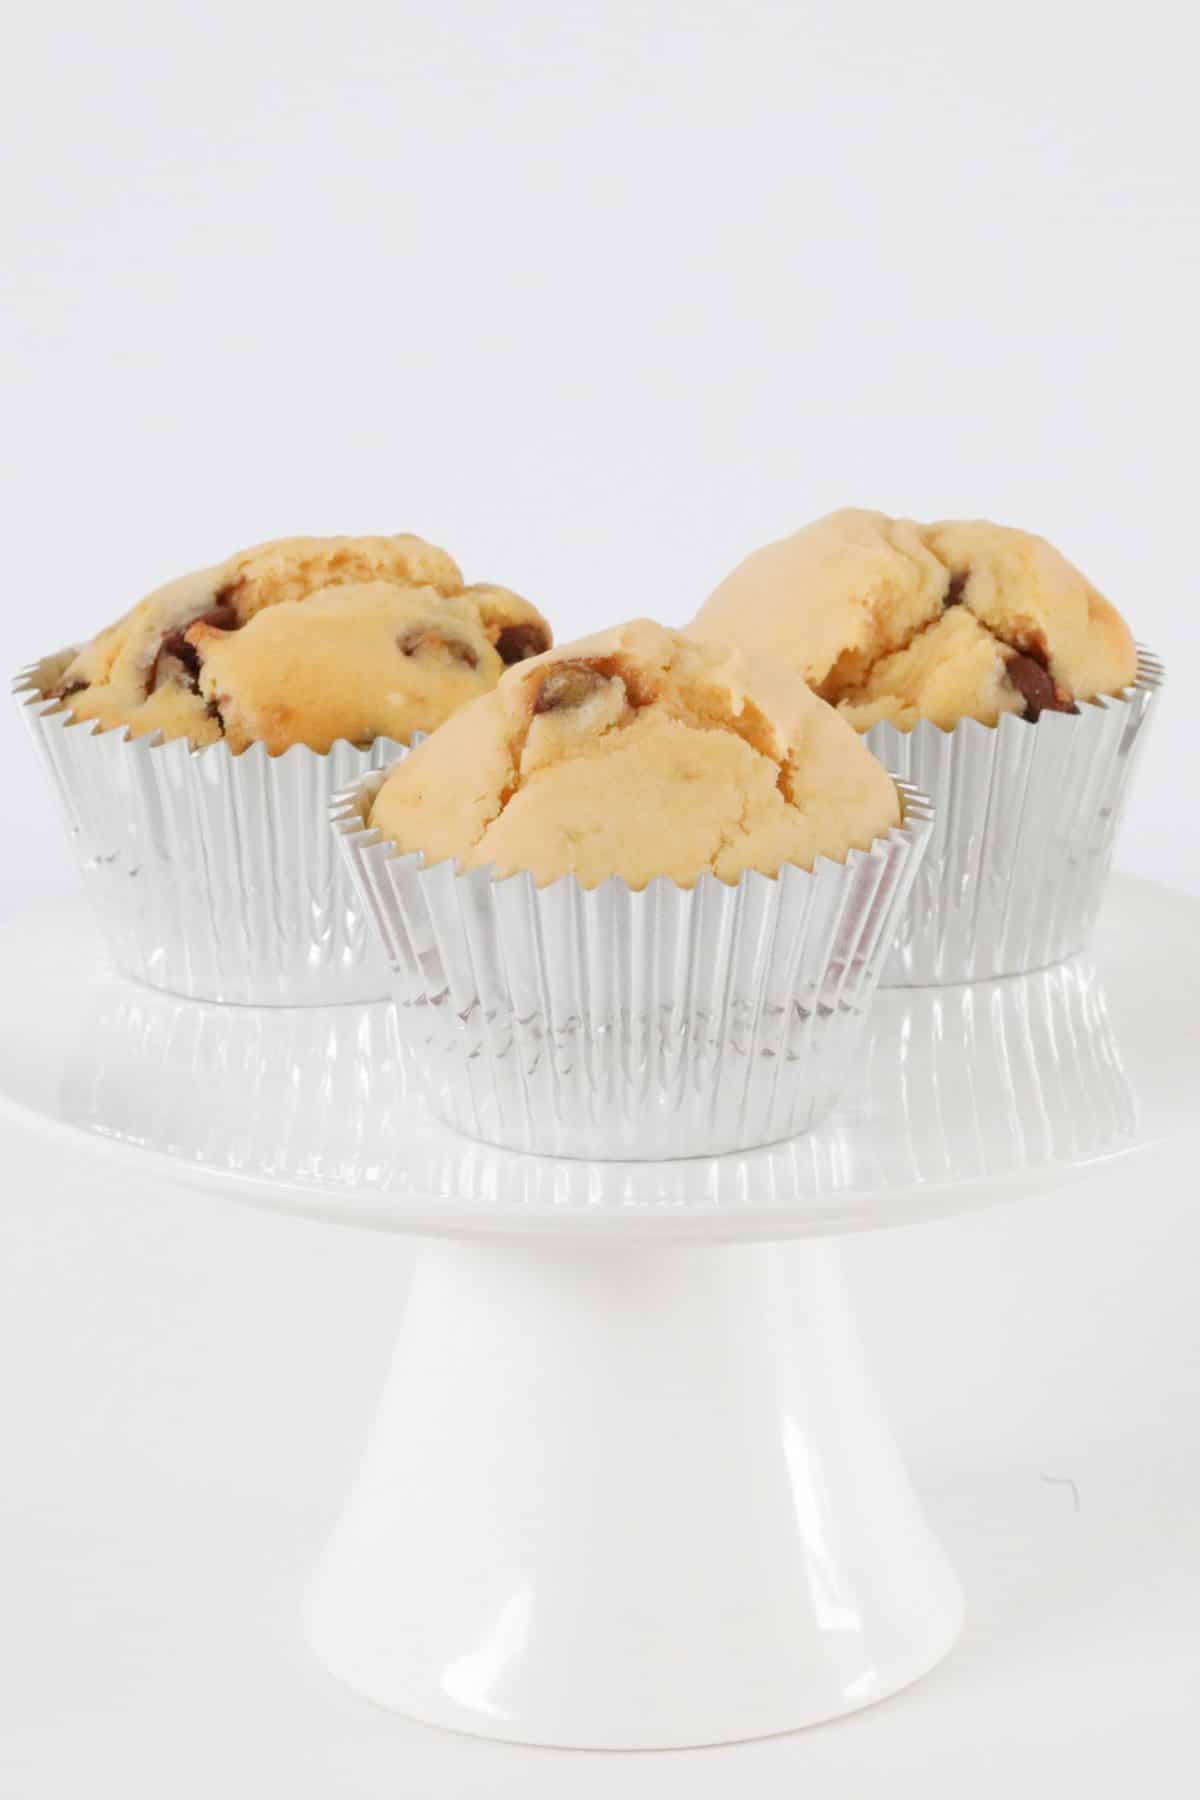 Three chocolate chip muffins on a cake stand.